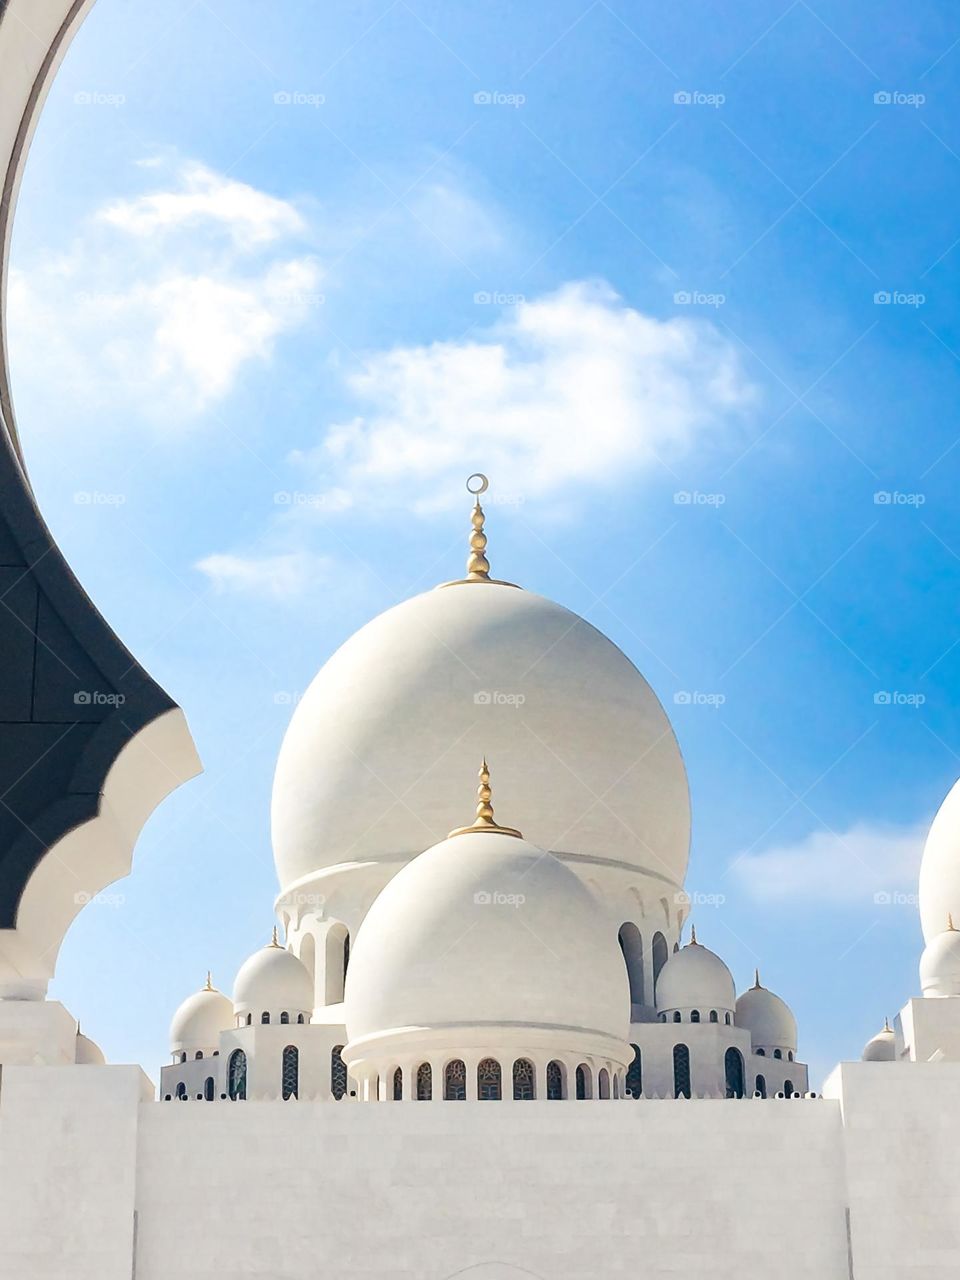 Sheikh zayed mosque modern architecture abu dhabi. White stone, the dome of the mosque on the blue sky. Beautiful architecture